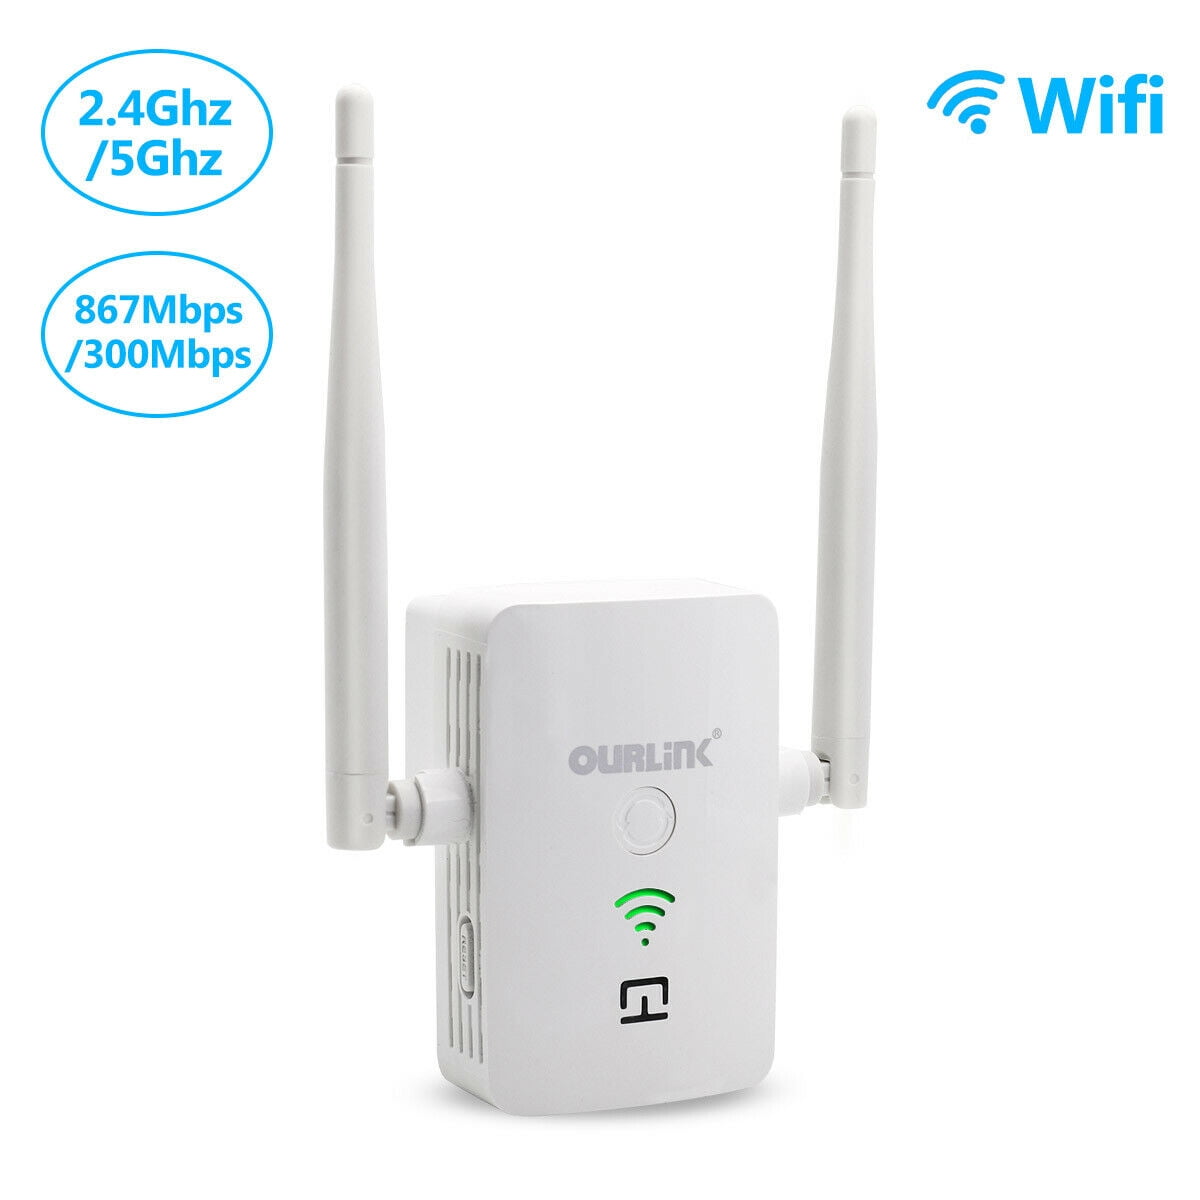 ELEGIANT AC1200Mbps Wireless WiFi Repeater Signal Amplifier Booster Supports Router/Repeater/Access Point WiFi Range Extender White with High Gain 4 External Antennas and 360 Degree WiFi Coverage 